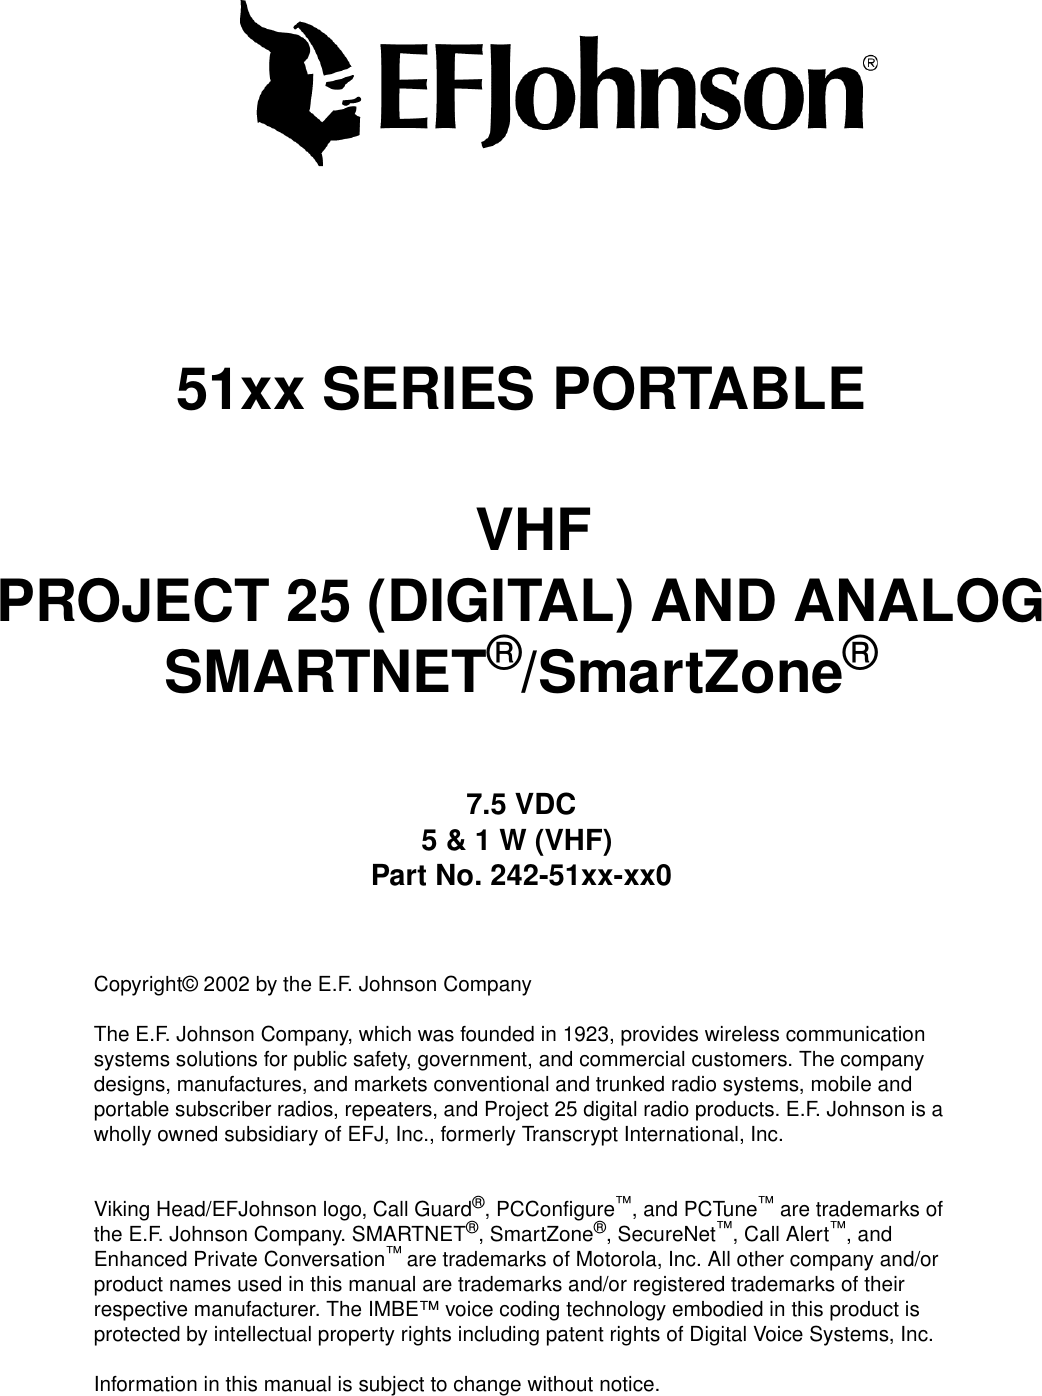 51xx SERIES PORTABLEVHFPROJECT 25 (DIGITAL) AND ANALOGSMARTNET®/SmartZone®7.5 VDC5 &amp; 1 W (VHF)Part No. 242-51xx-xx0Copyright© 2002 by the E.F. Johnson CompanyThe E.F. Johnson Company, which was founded in 1923, provides wireless communication systems solutions for public safety, government, and commercial customers. The company designs, manufactures, and markets conventional and trunked radio systems, mobile and portable subscriber radios, repeaters, and Project 25 digital radio products. E.F. Johnson is a wholly owned subsidiary of EFJ, Inc., formerly Transcrypt International, Inc.Viking Head/EFJohnson logo, Call Guard®, PCConfigure™, and PCTune™ are trademarks of the E.F. Johnson Company. SMARTNET®, SmartZone®, SecureNet™, Call Alert™, and Enhanced Private Conversation™ are trademarks of Motorola, Inc. All other company and/or product names used in this manual are trademarks and/or registered trademarks of their respective manufacturer. The IMBE™ voice coding technology embodied in this product is protected by intellectual property rights including patent rights of Digital Voice Systems, Inc.Information in this manual is subject to change without notice. 